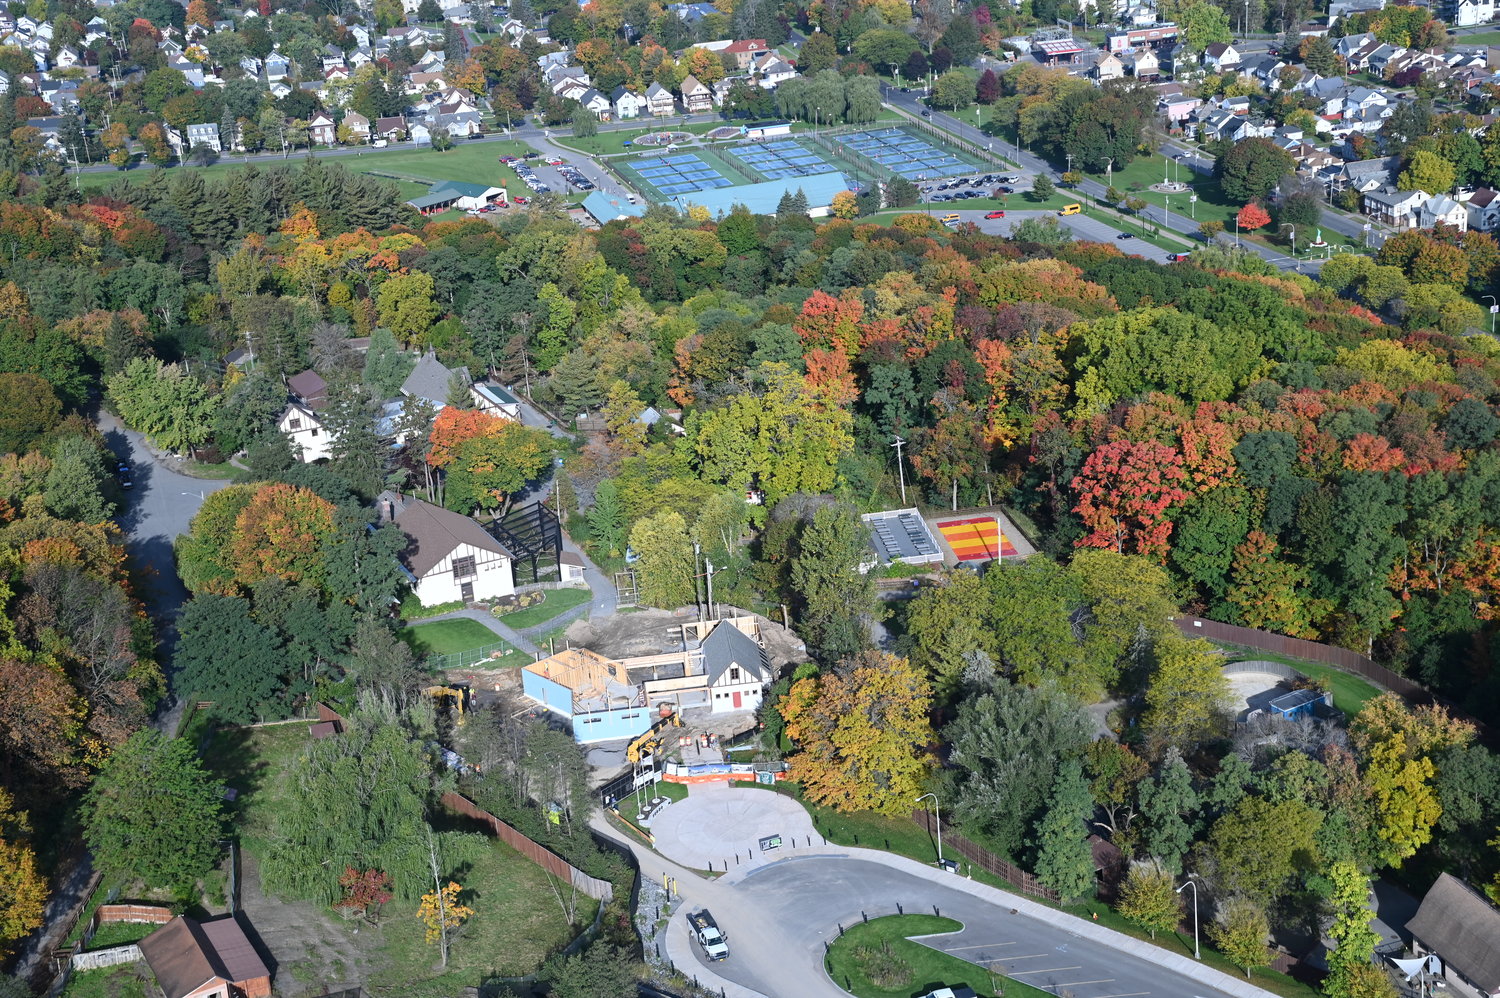 Construction of the new entrance building at the Utica Zoo is shown in the foreground in this aerial shot from Wednesday, Oct. 12. Zoo officials expect a completion date in early 2023.